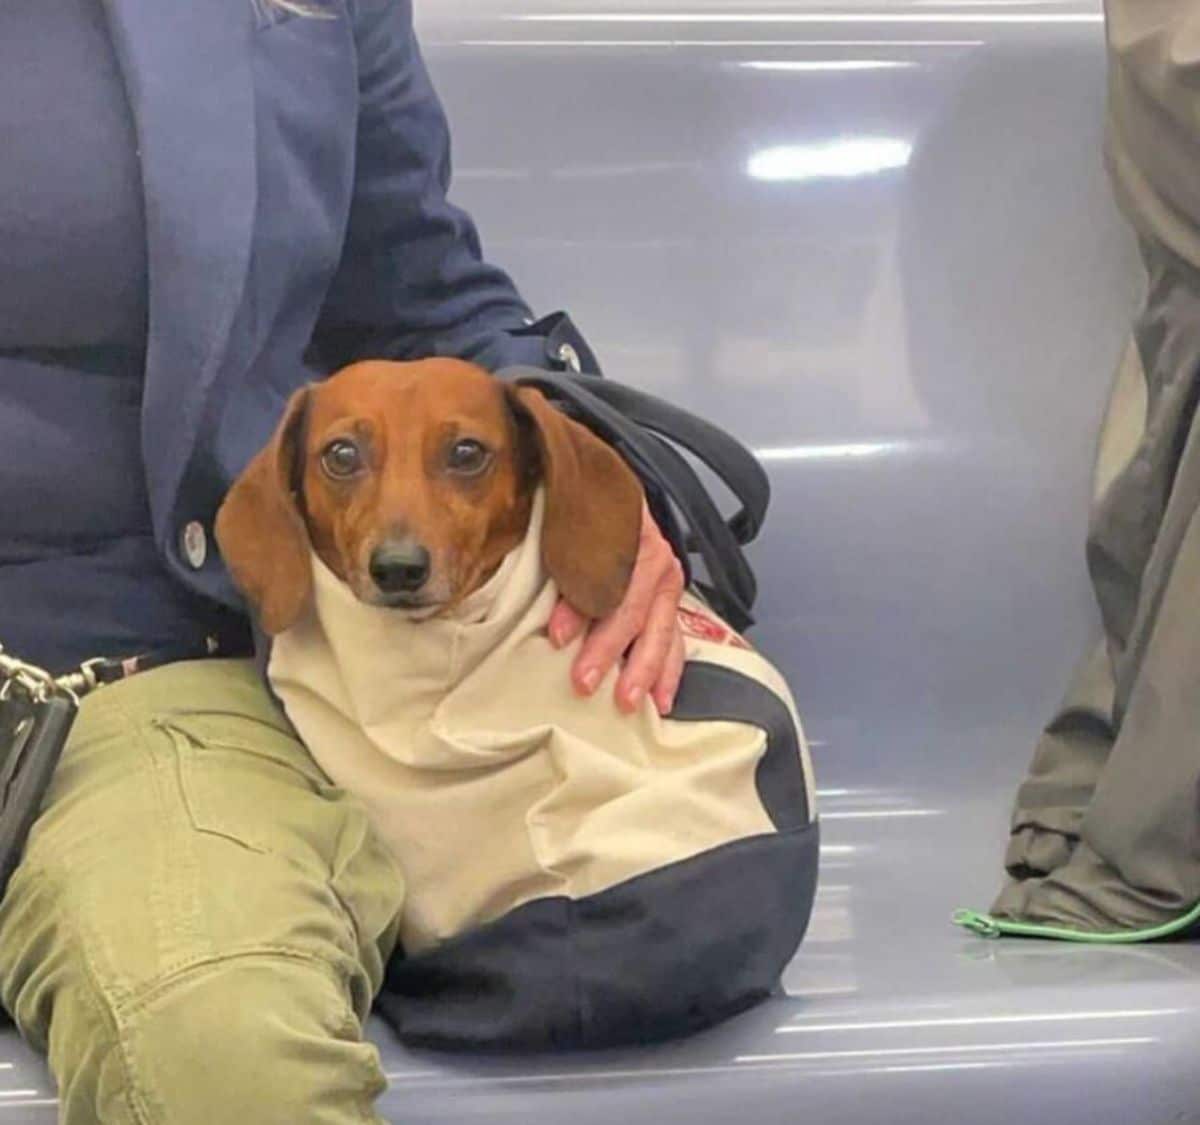 brown dog in a white and blue bag on a plastic seat with the dog's head sticking out of the bag